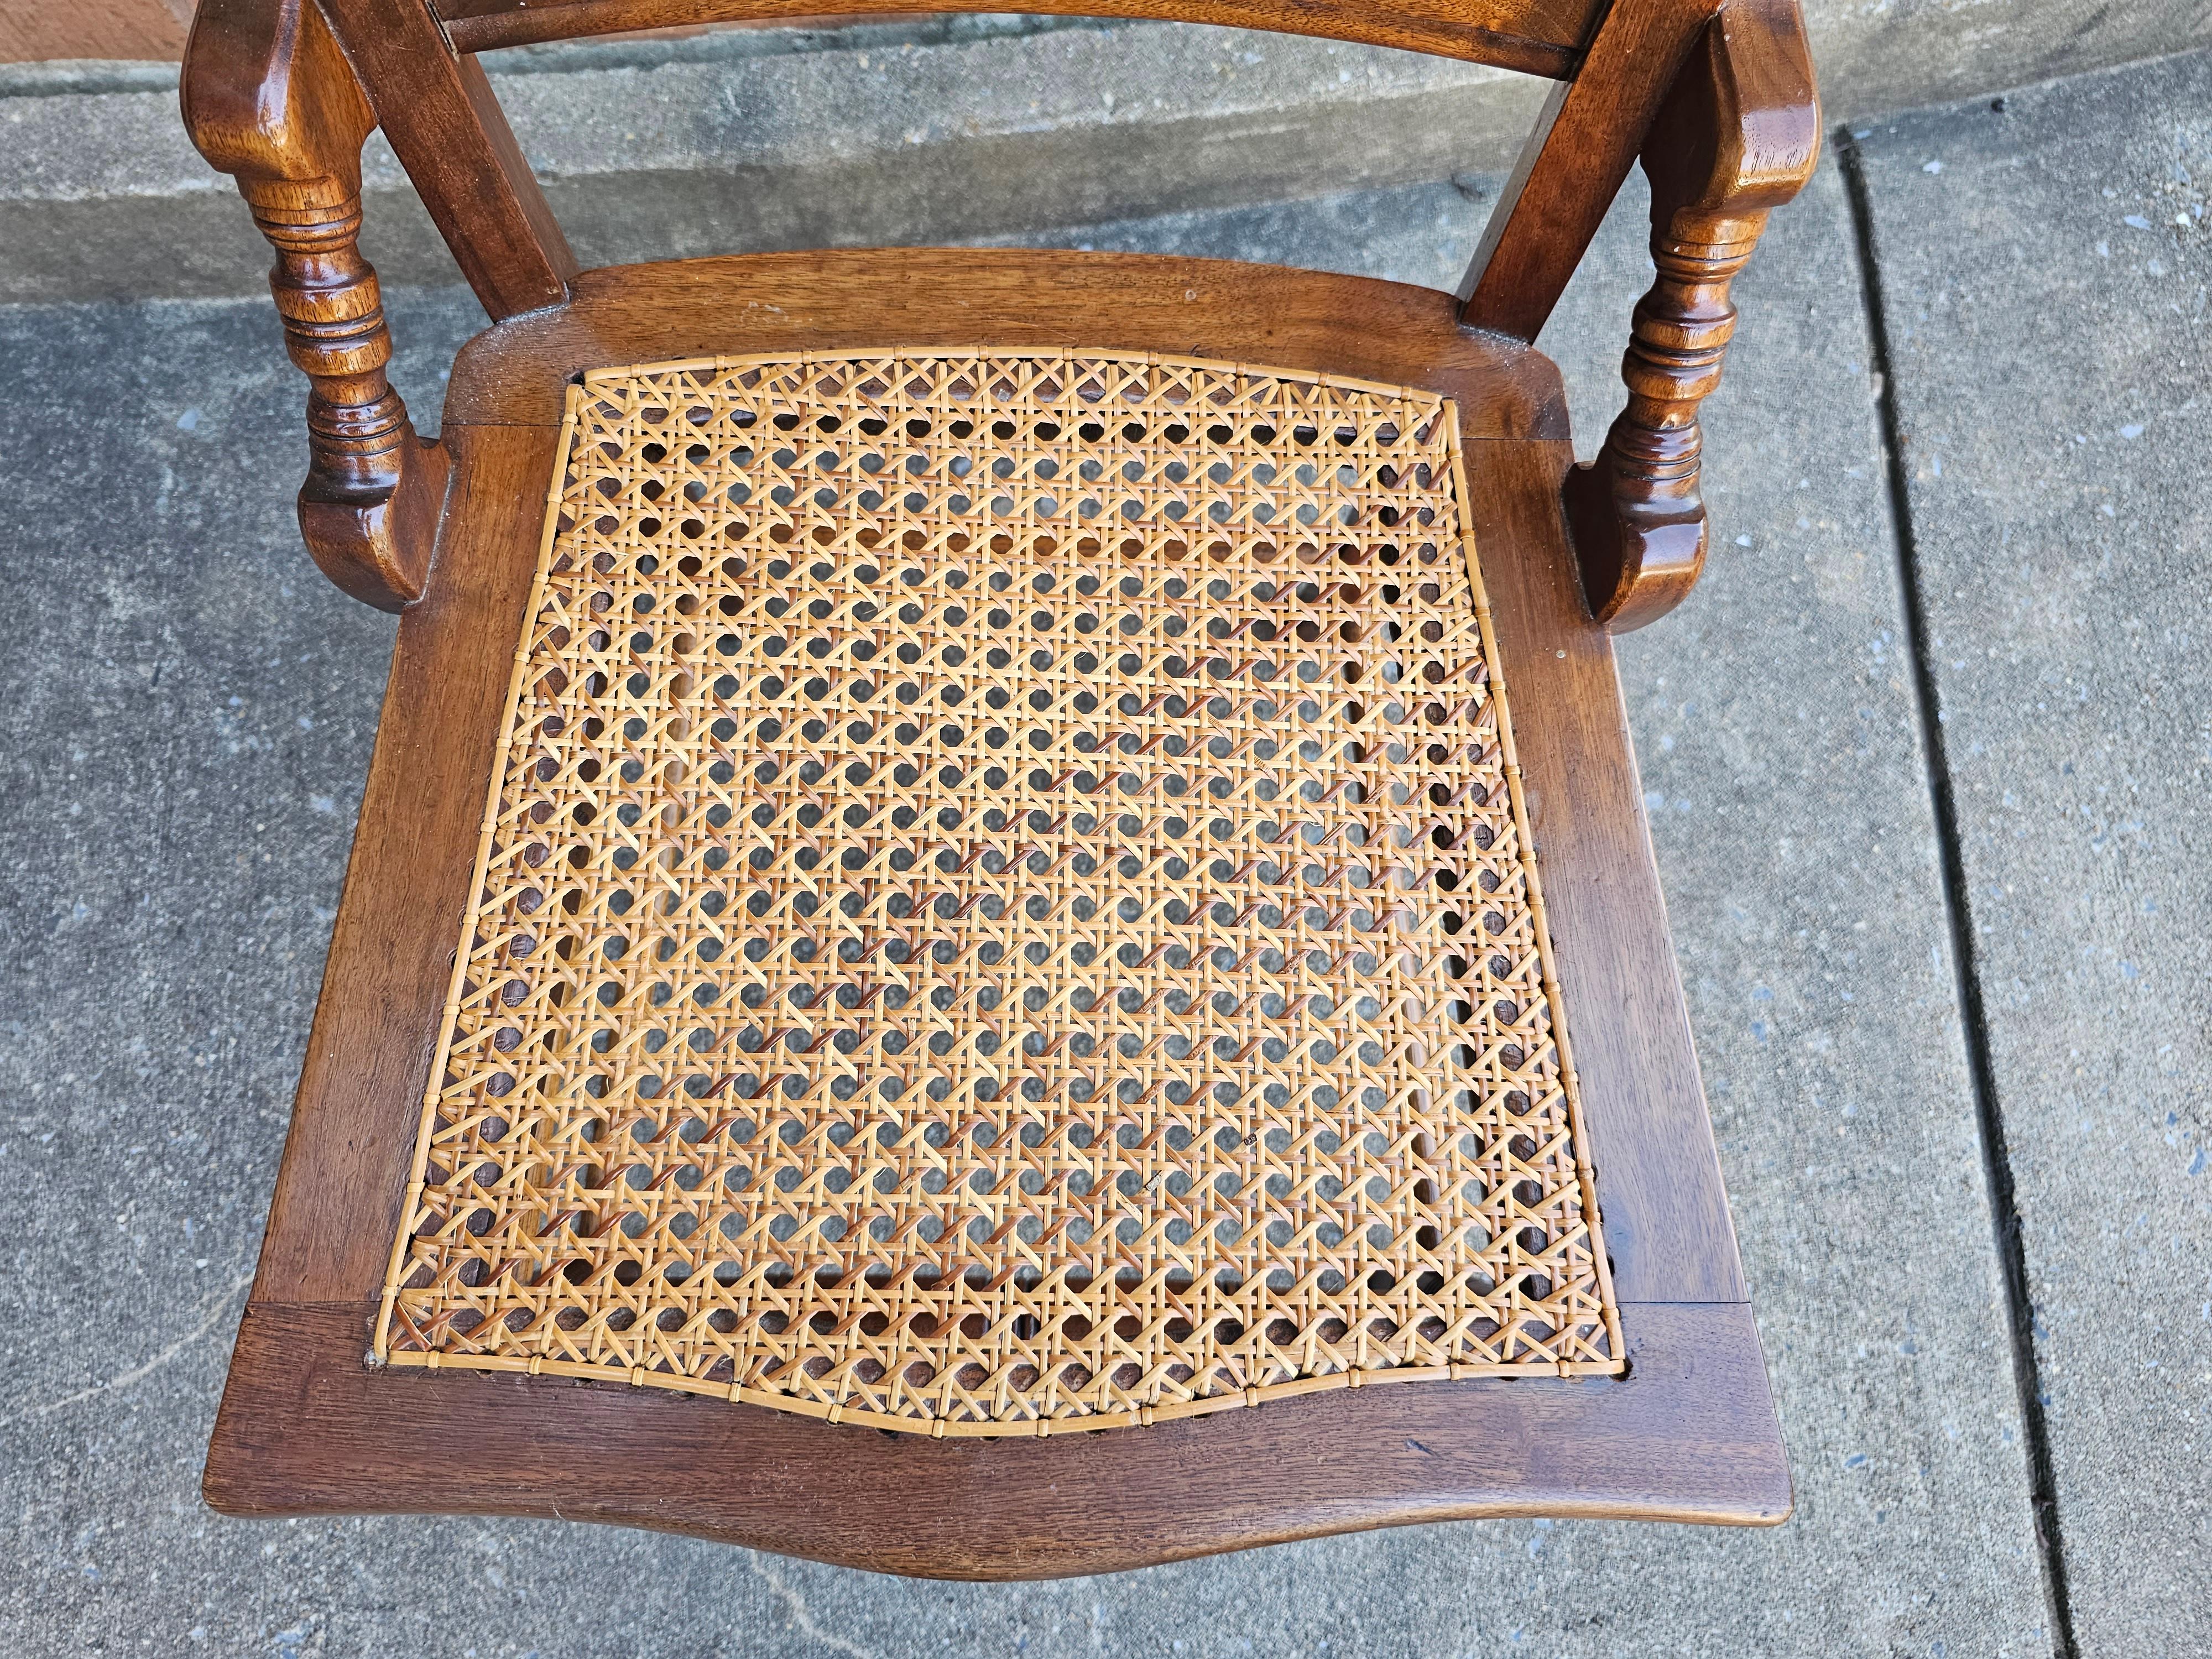 antique wooden chairs with cane seats